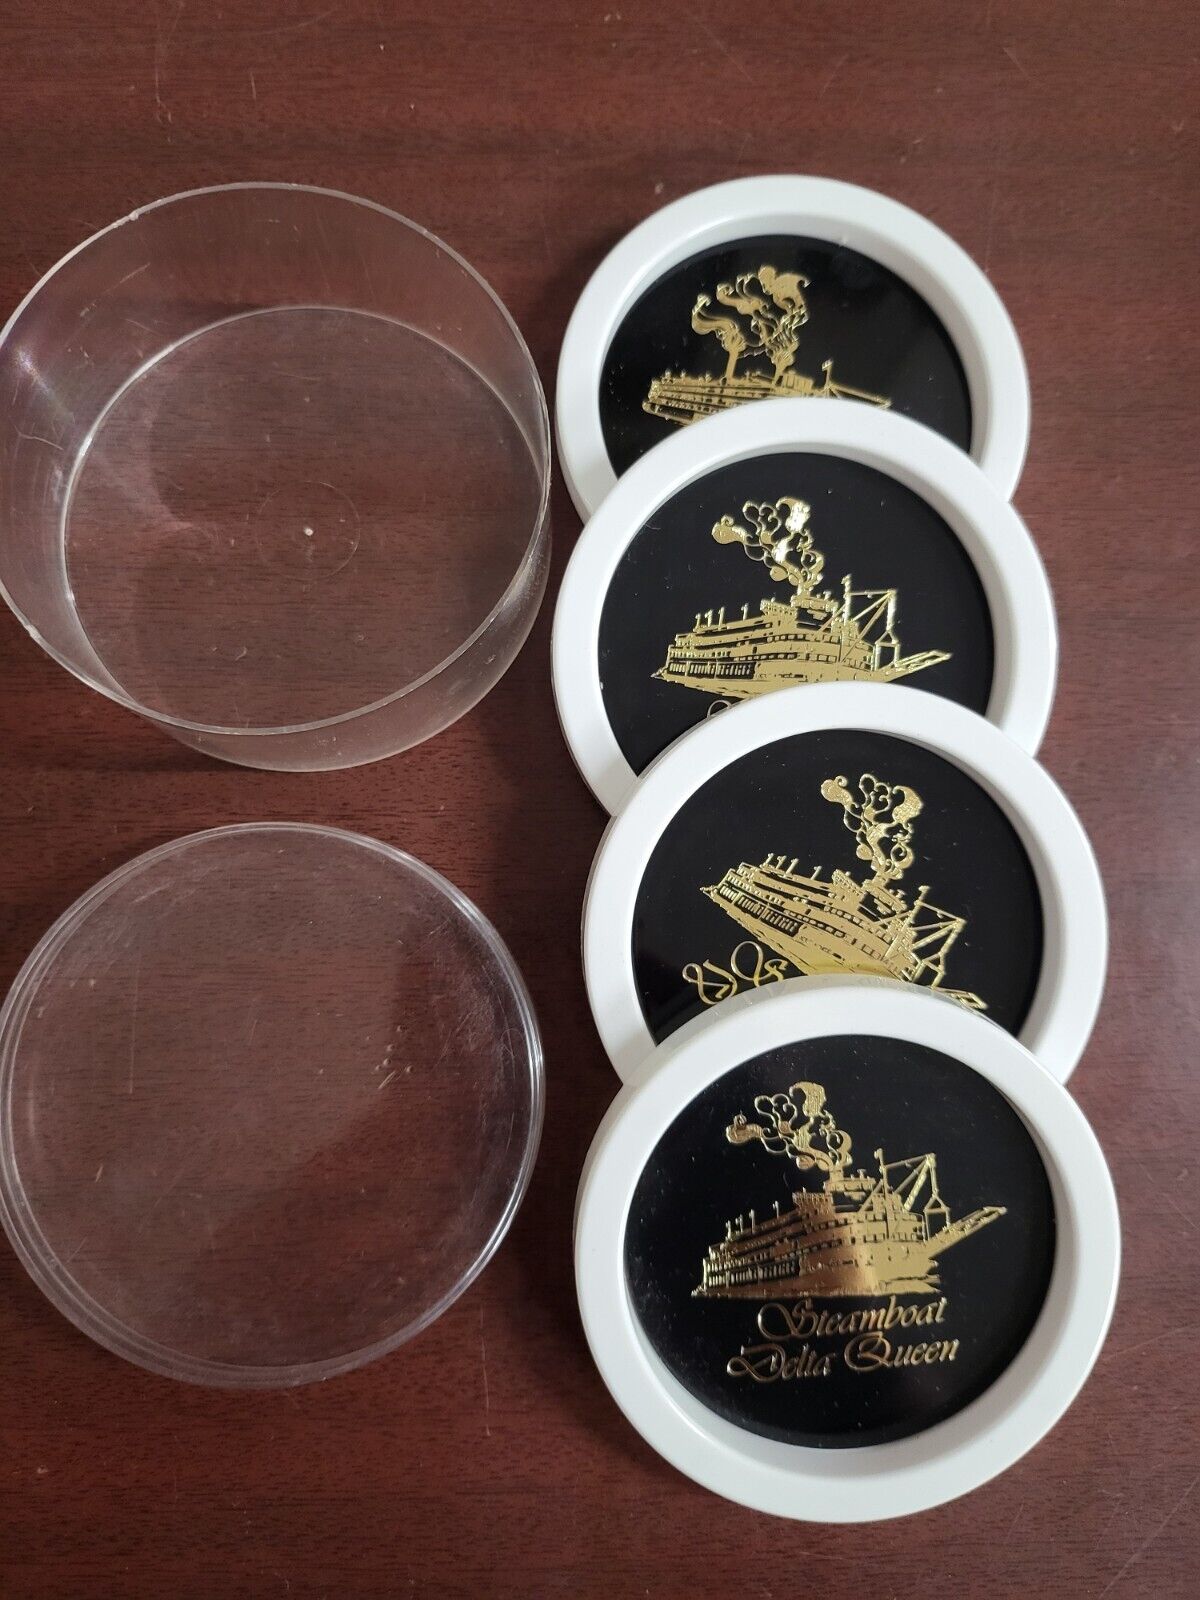 Steamboat Delta Queen Coasters Set 4 count in Container 3.5\